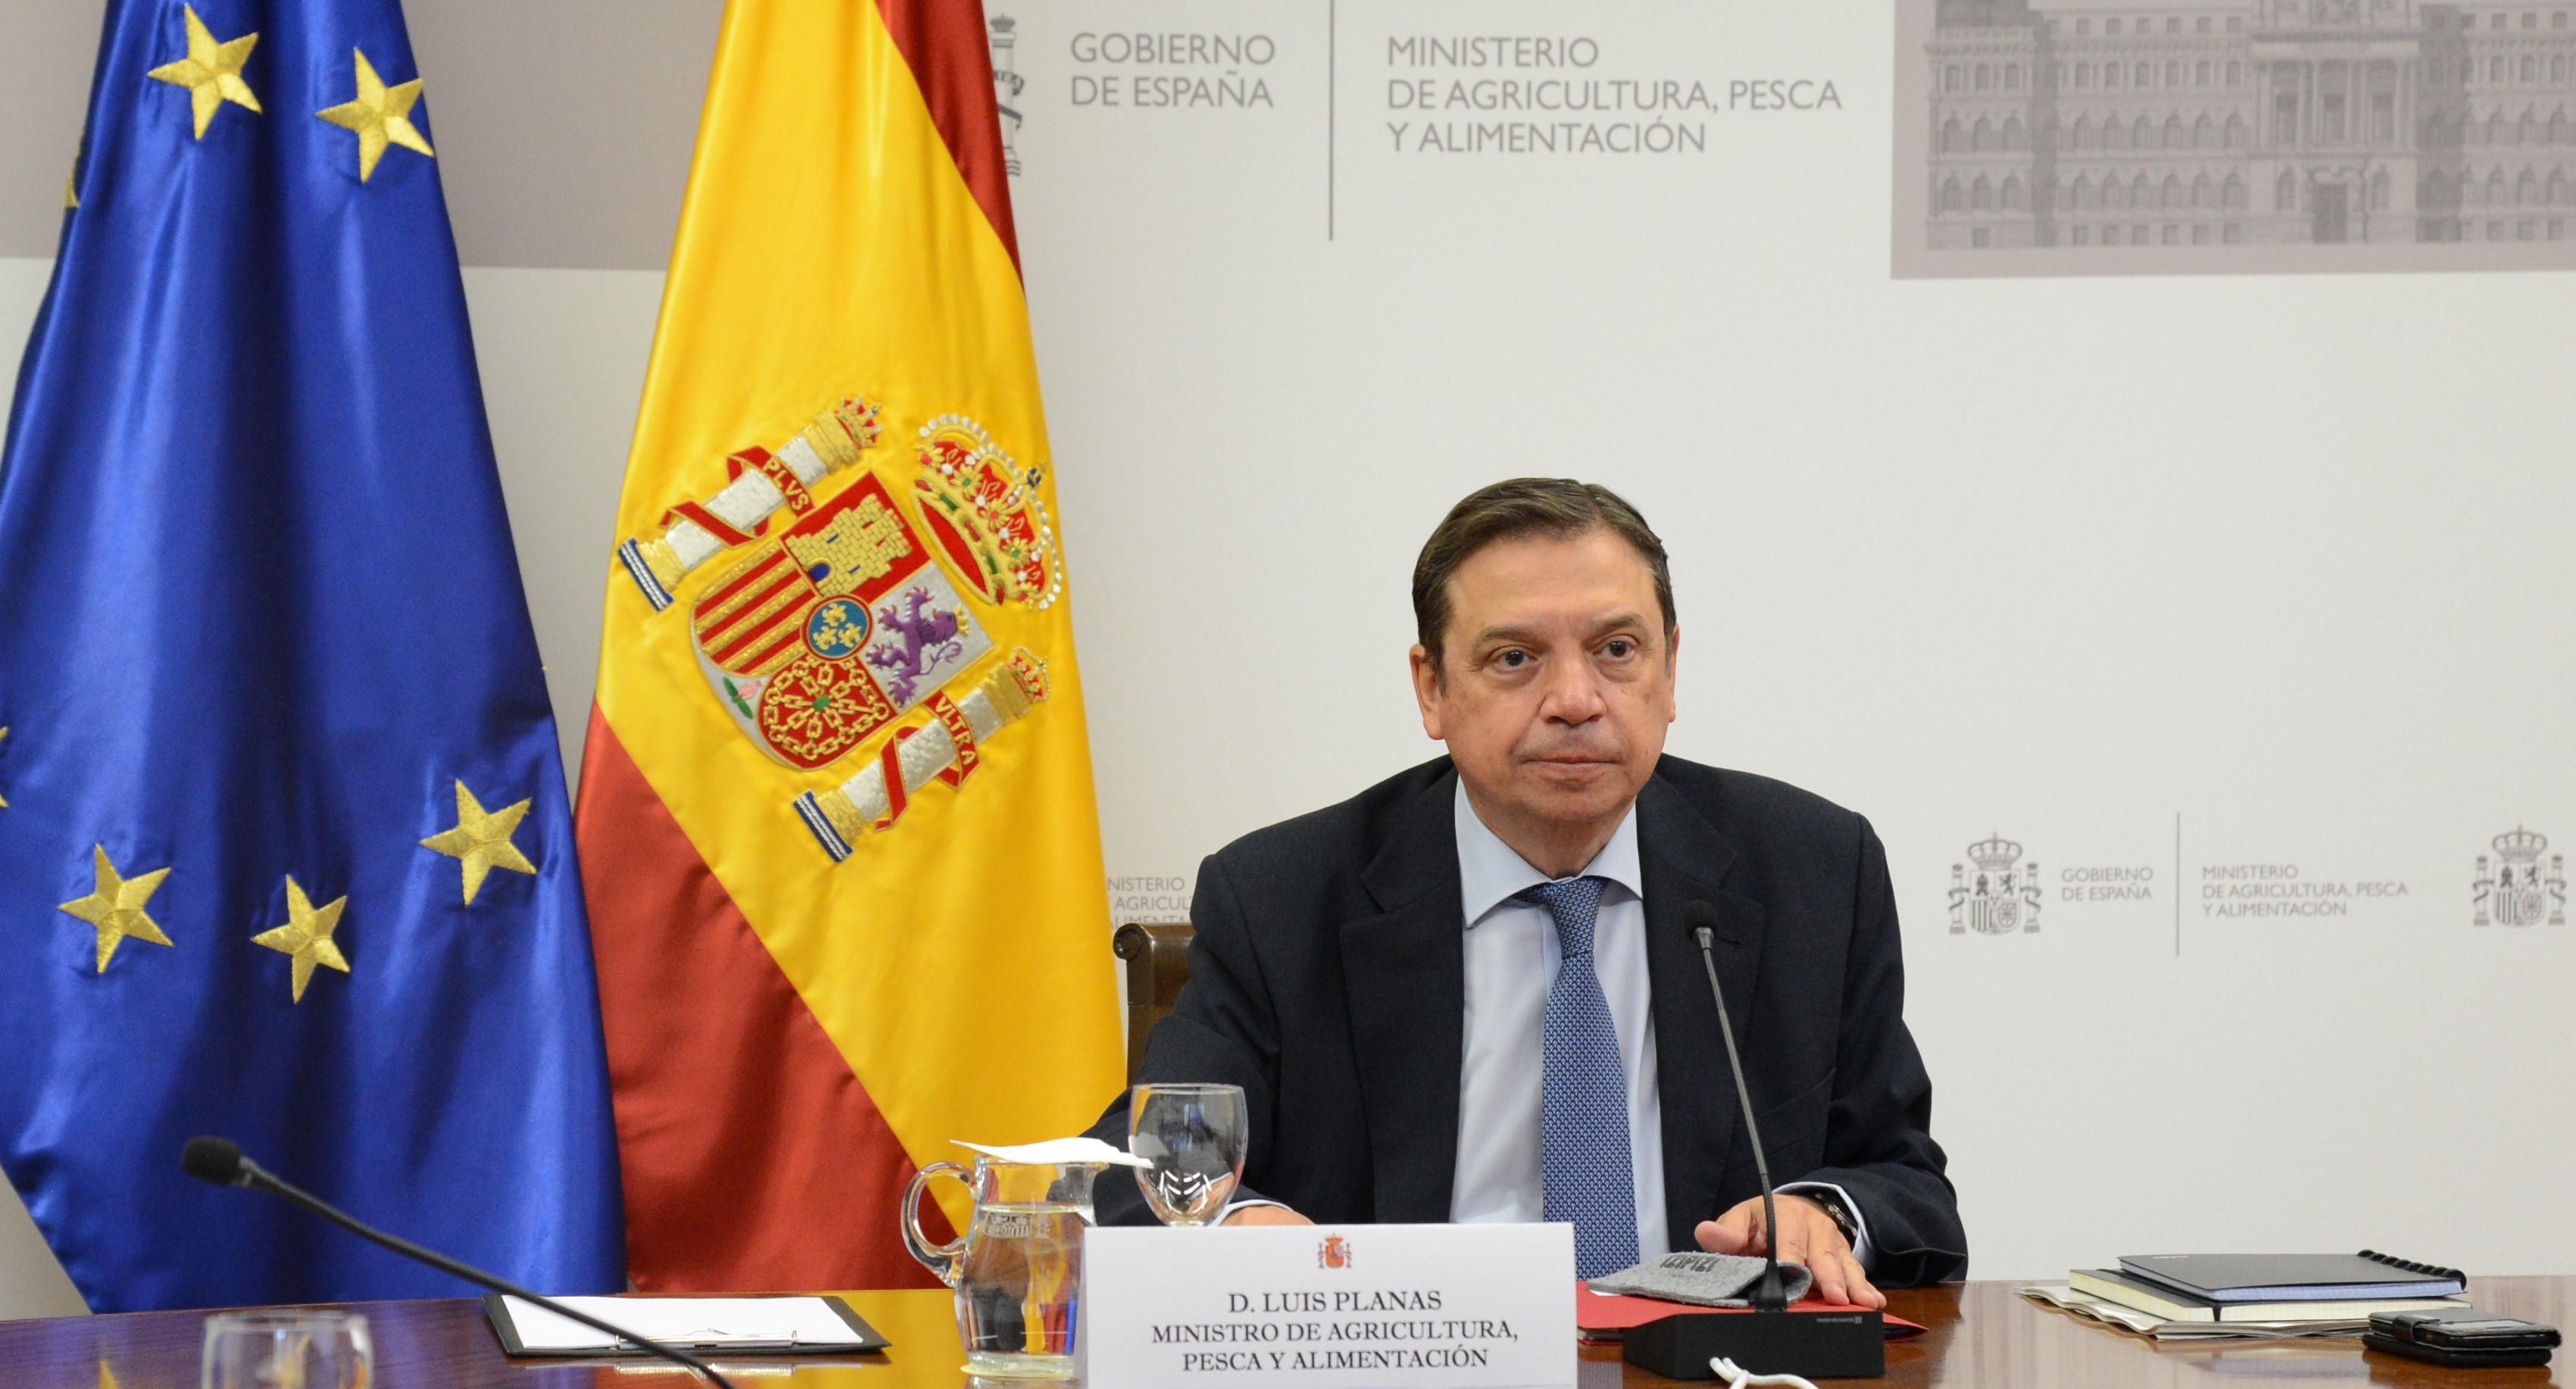 Luis Planas, Minister of Agriculture, Fisheries and Food highlighted that Spain joined the Agricultural Innovation Mission for Climate promoted by the US.